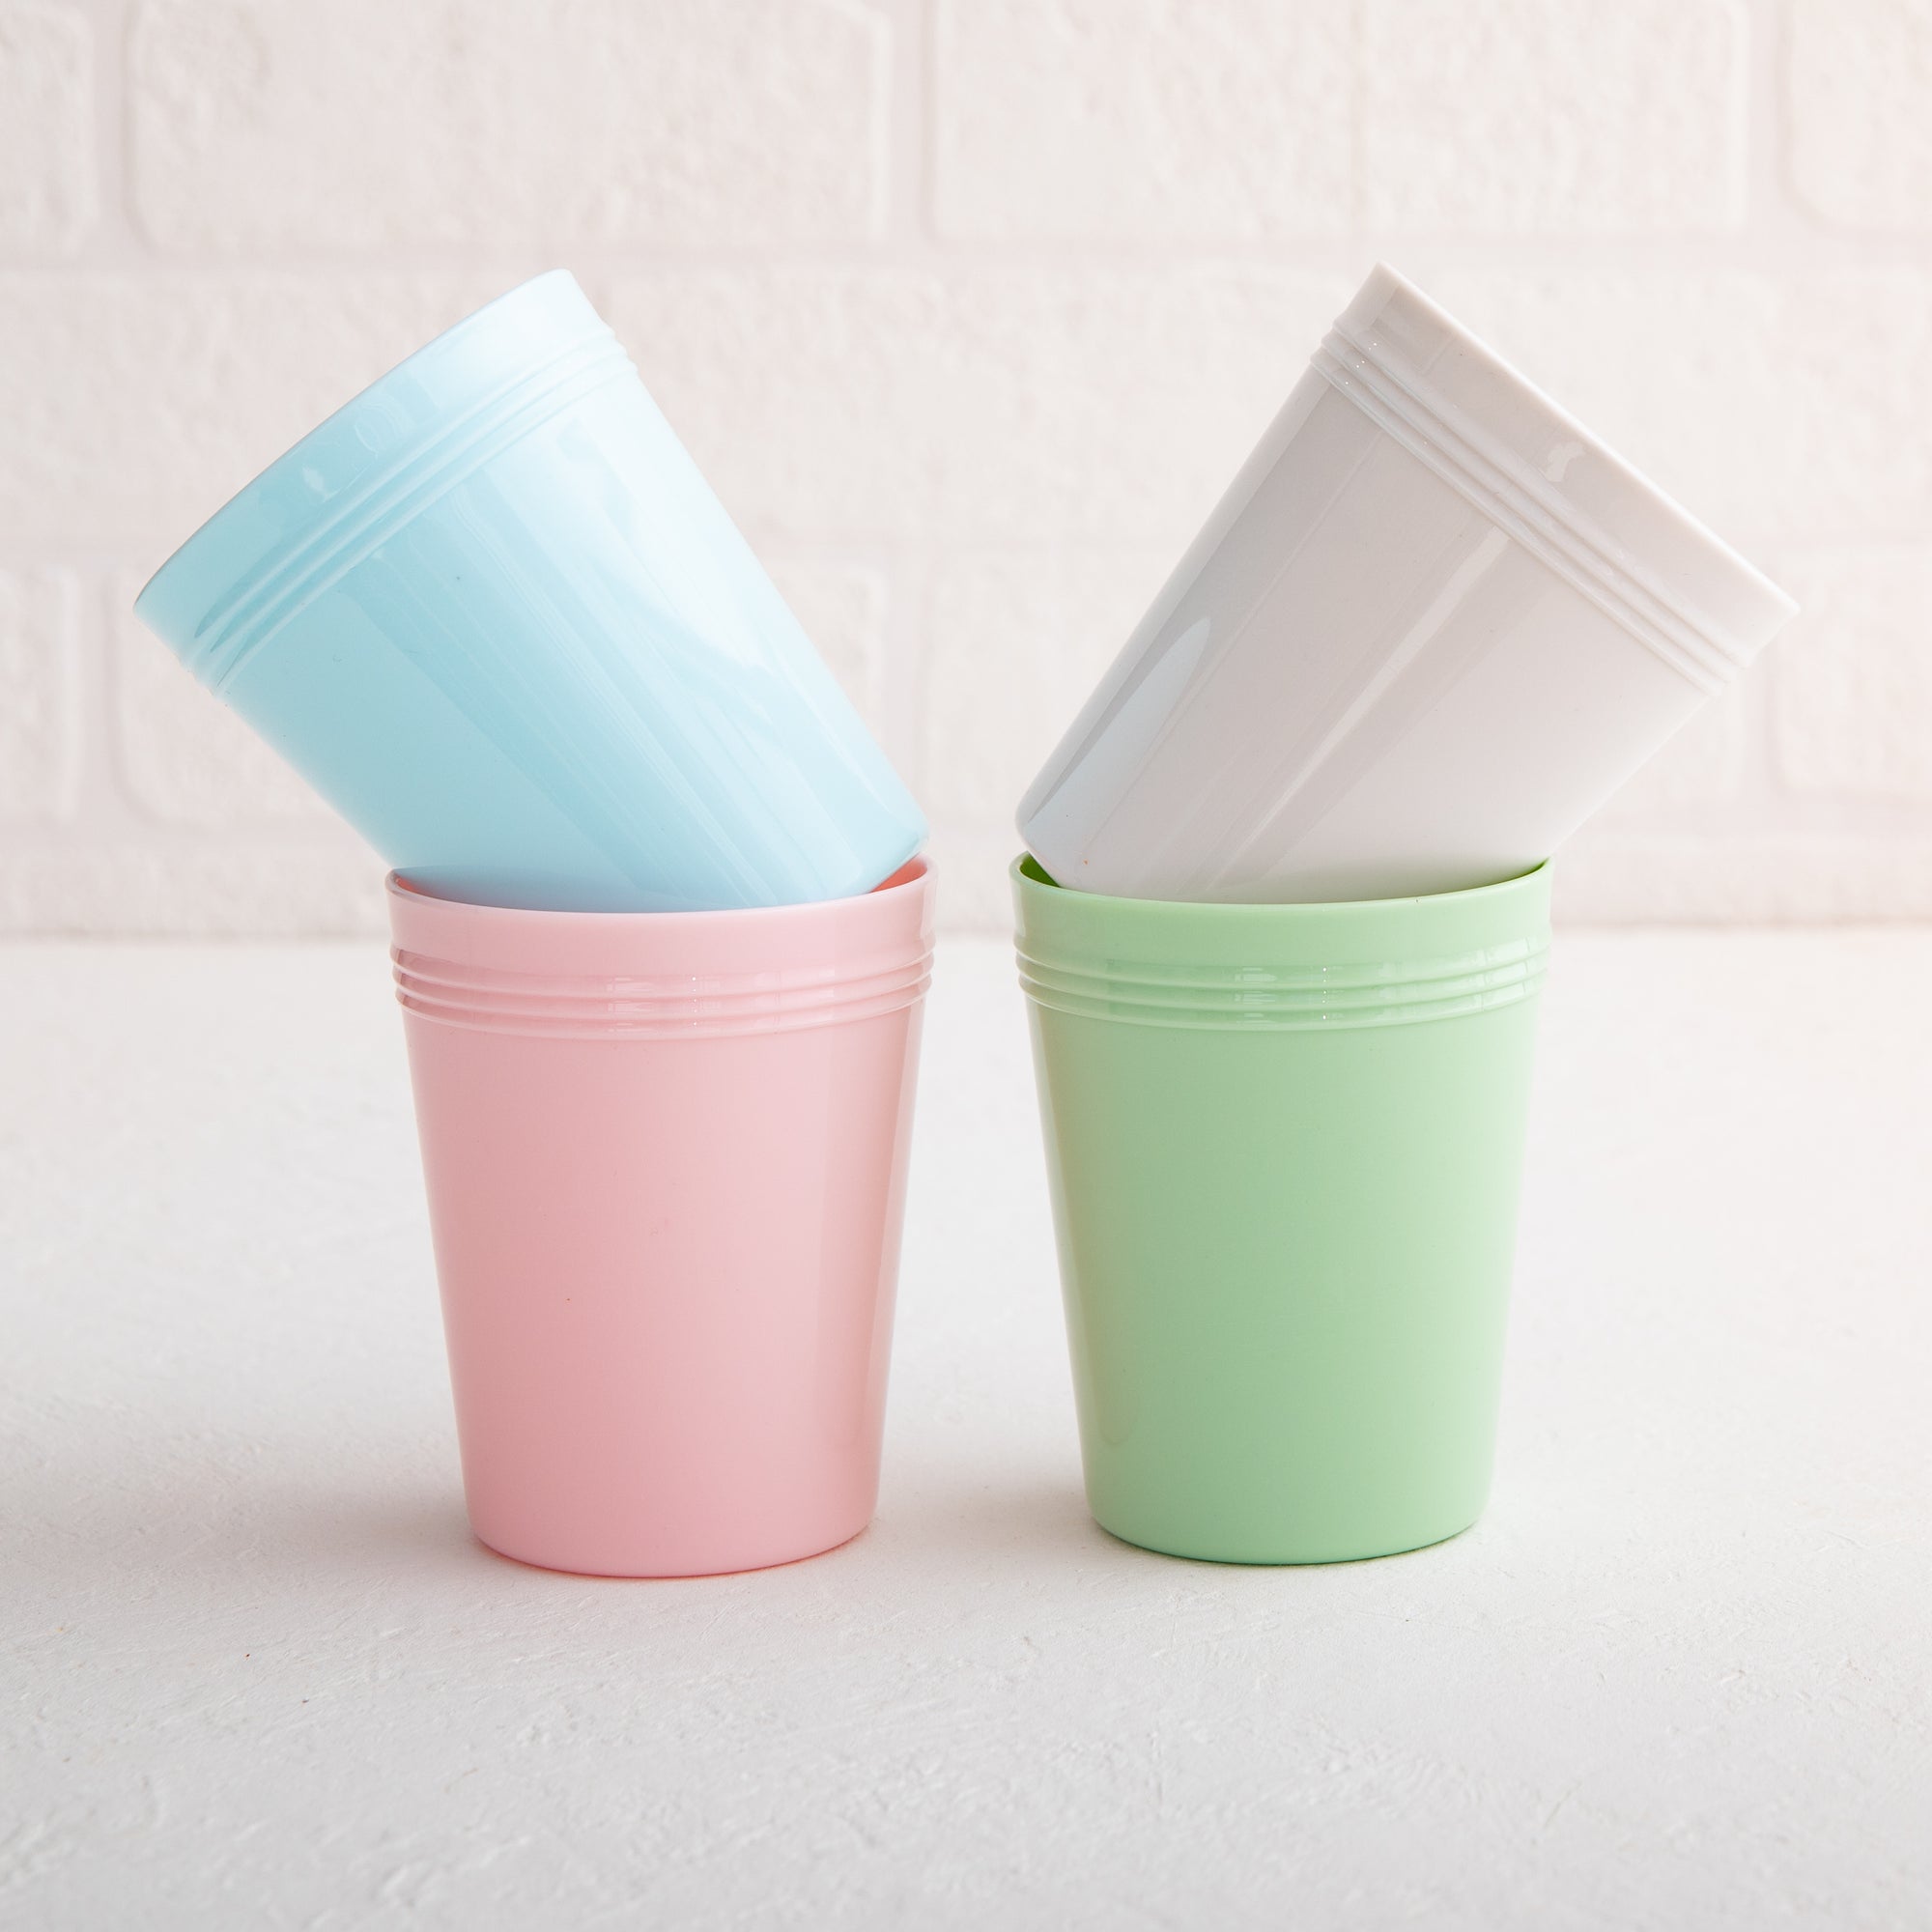 Recycled Plastic Cup for Toddlers - Eco-Friendly Cup - Nestor Avenue. Blue, pink, grey, green.